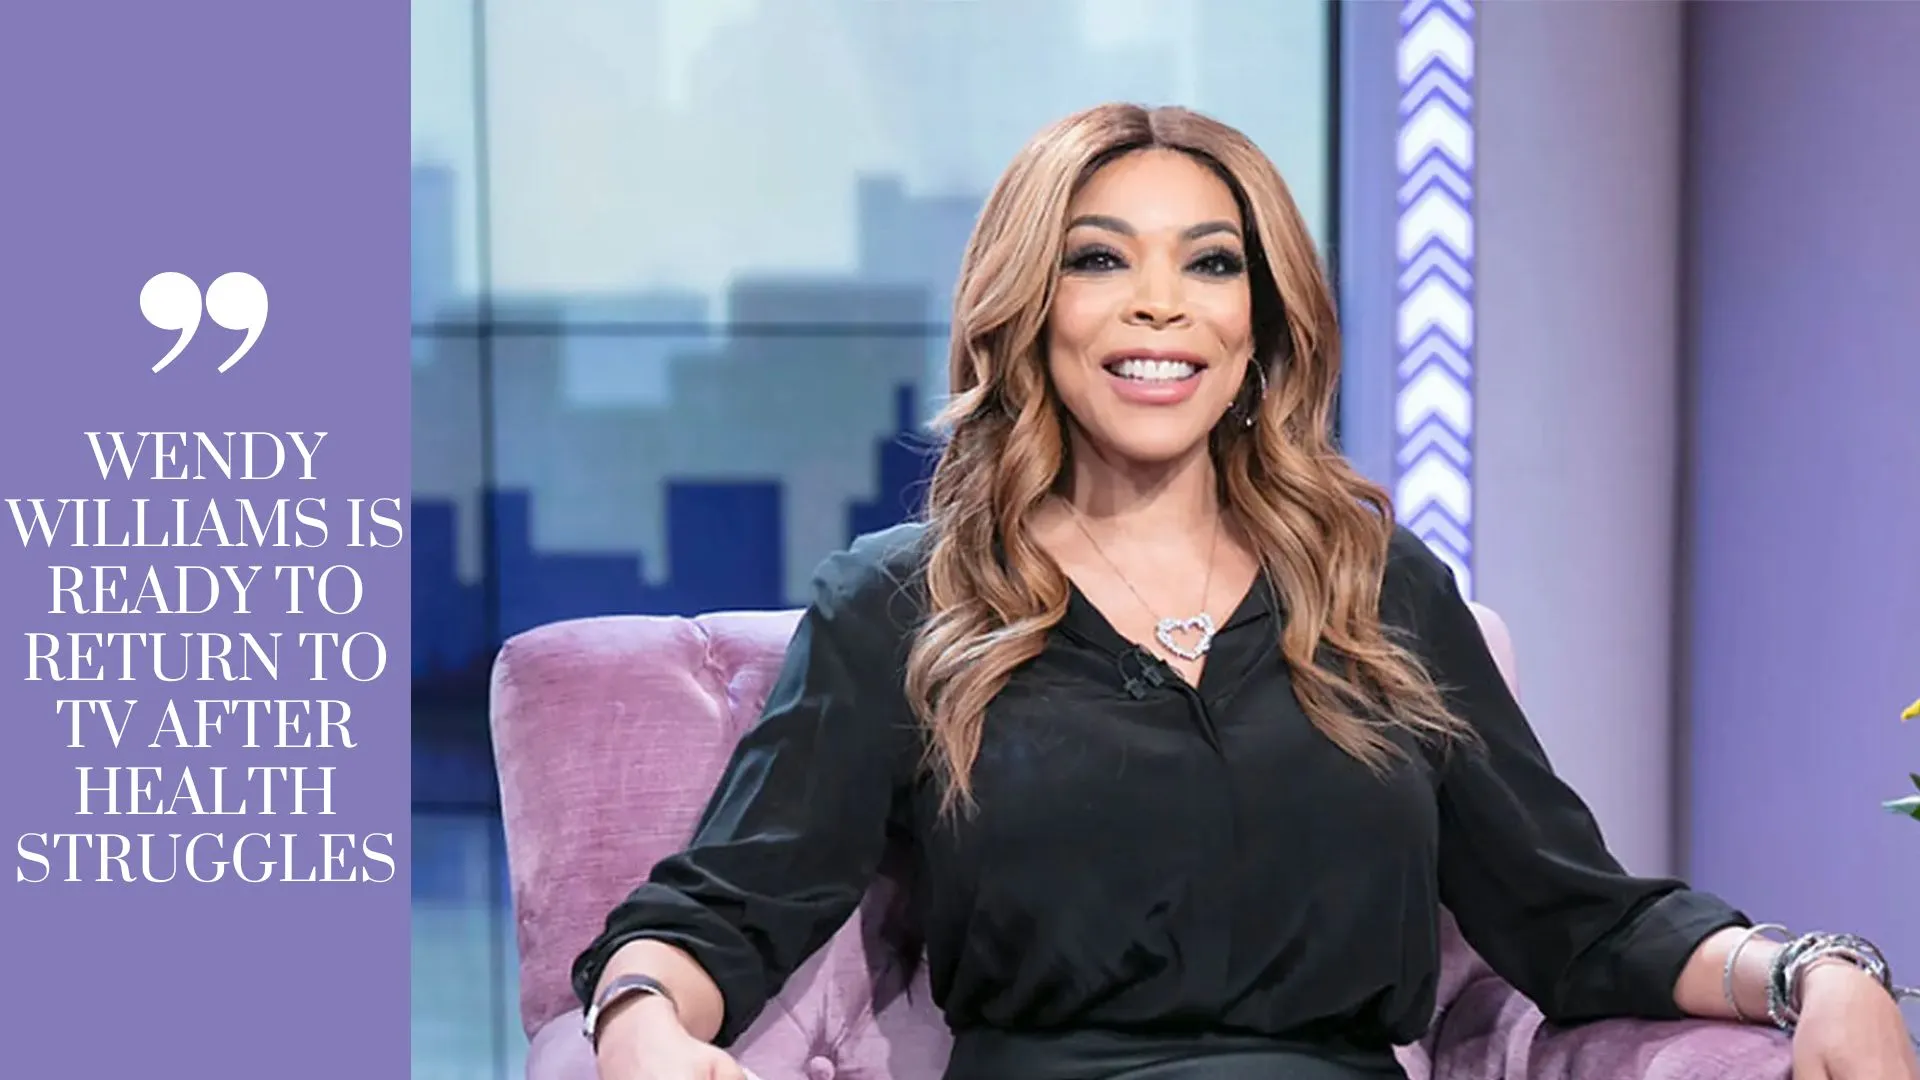 Wendy Williams is ready to return to TV after health struggles (Image credit: Page six)